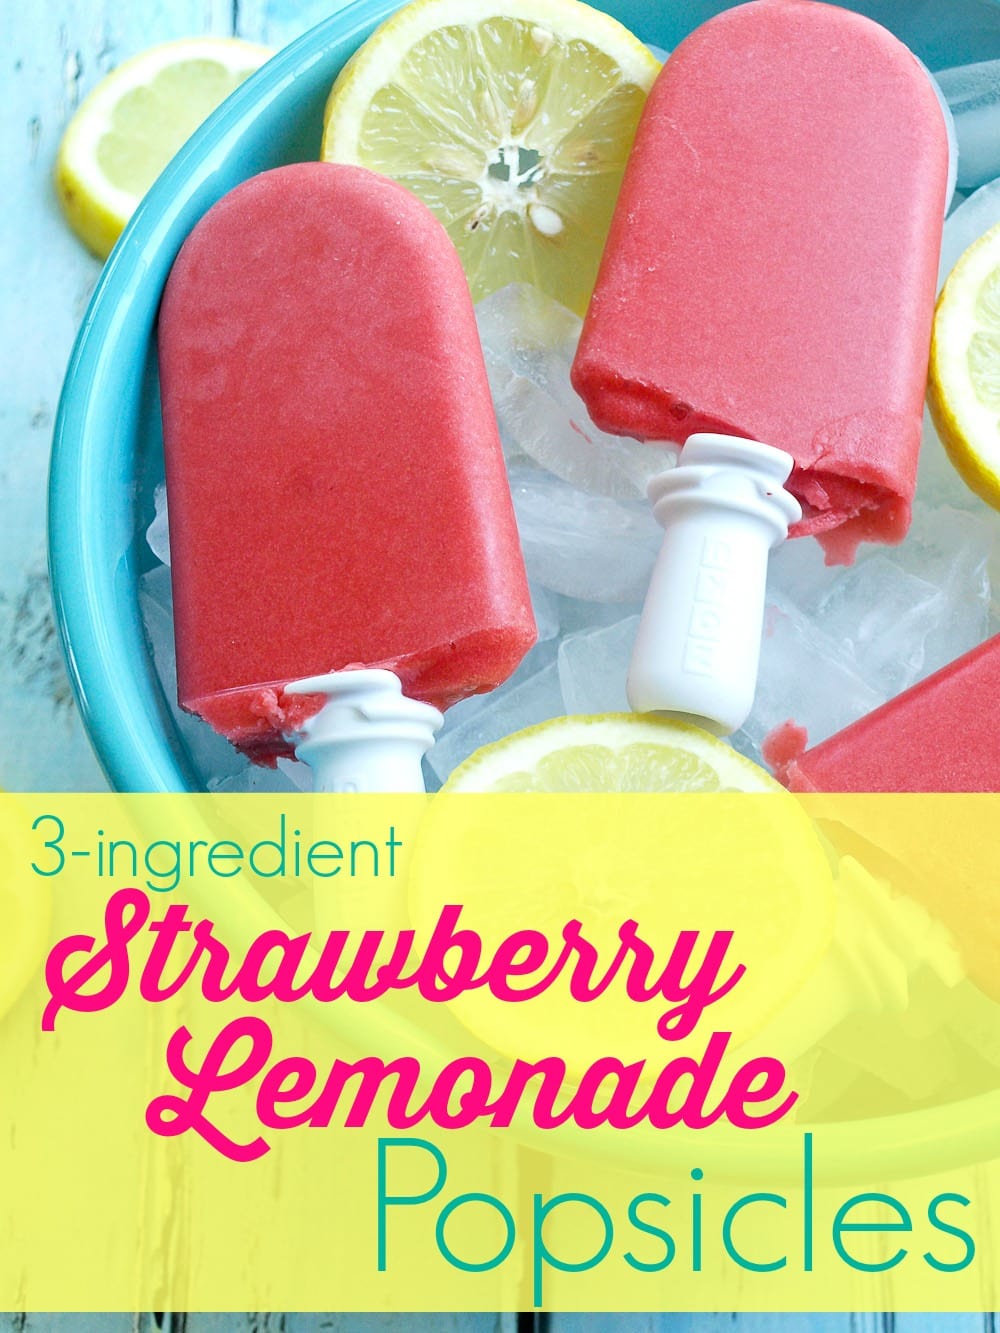 3 ingredient Strawberry Lemonade Popsicle recipe. Such an easy popsicle recipe and it's all natural ingredients--nothing fake here! This is the real deal and the kids love these for a healthy and light summer dessert.